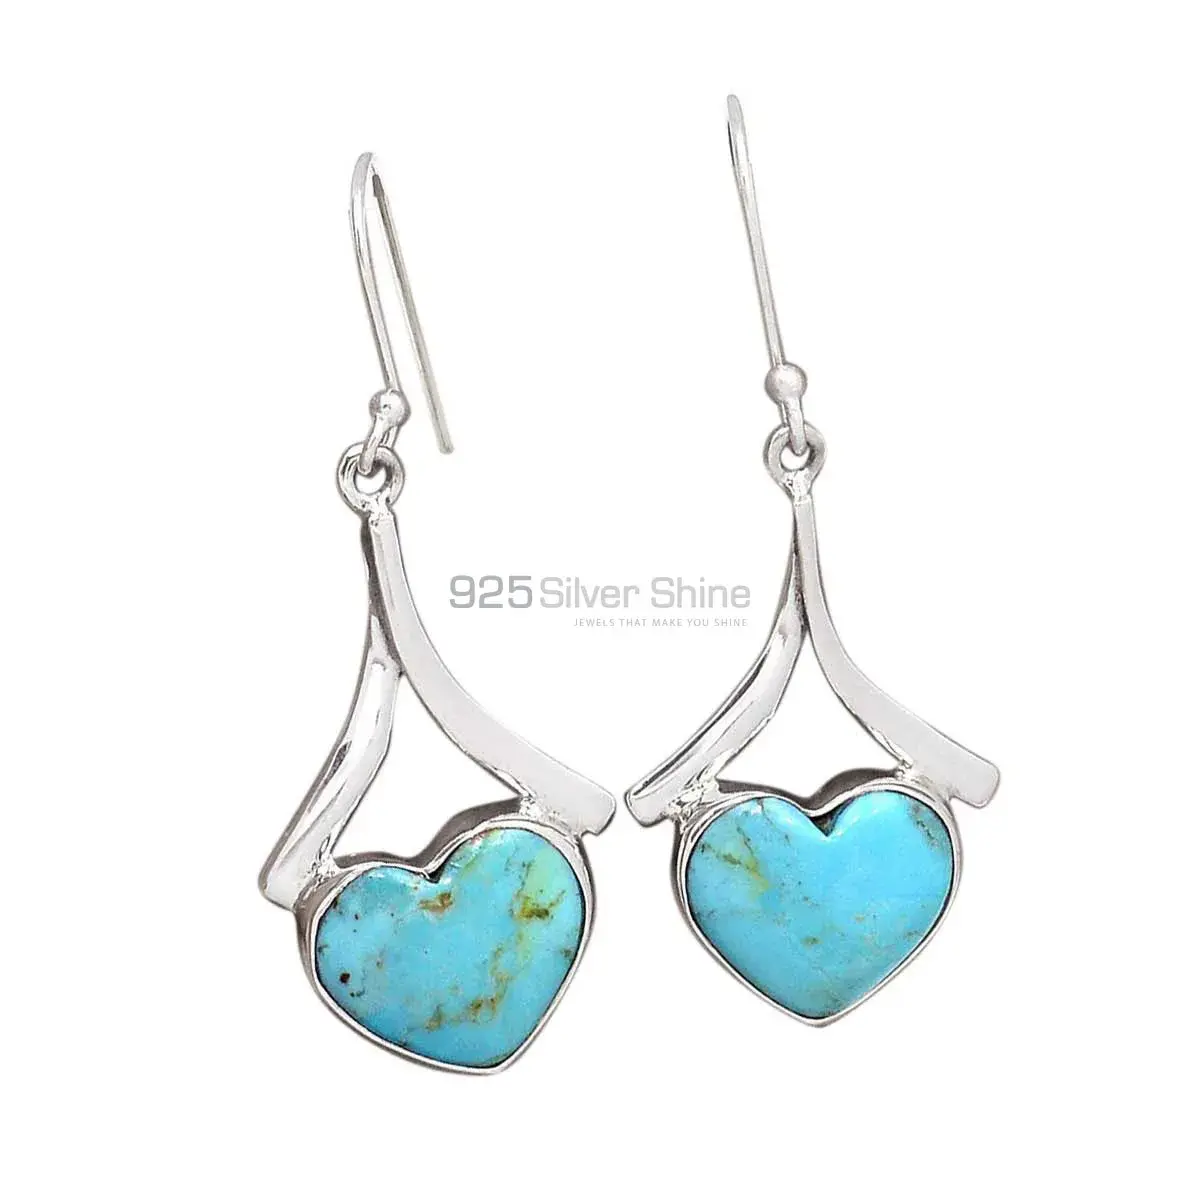 Unique 925 Sterling Silver Handmade Earrings Suppliers In Turquoise Gemstone Jewelry 925SE2163